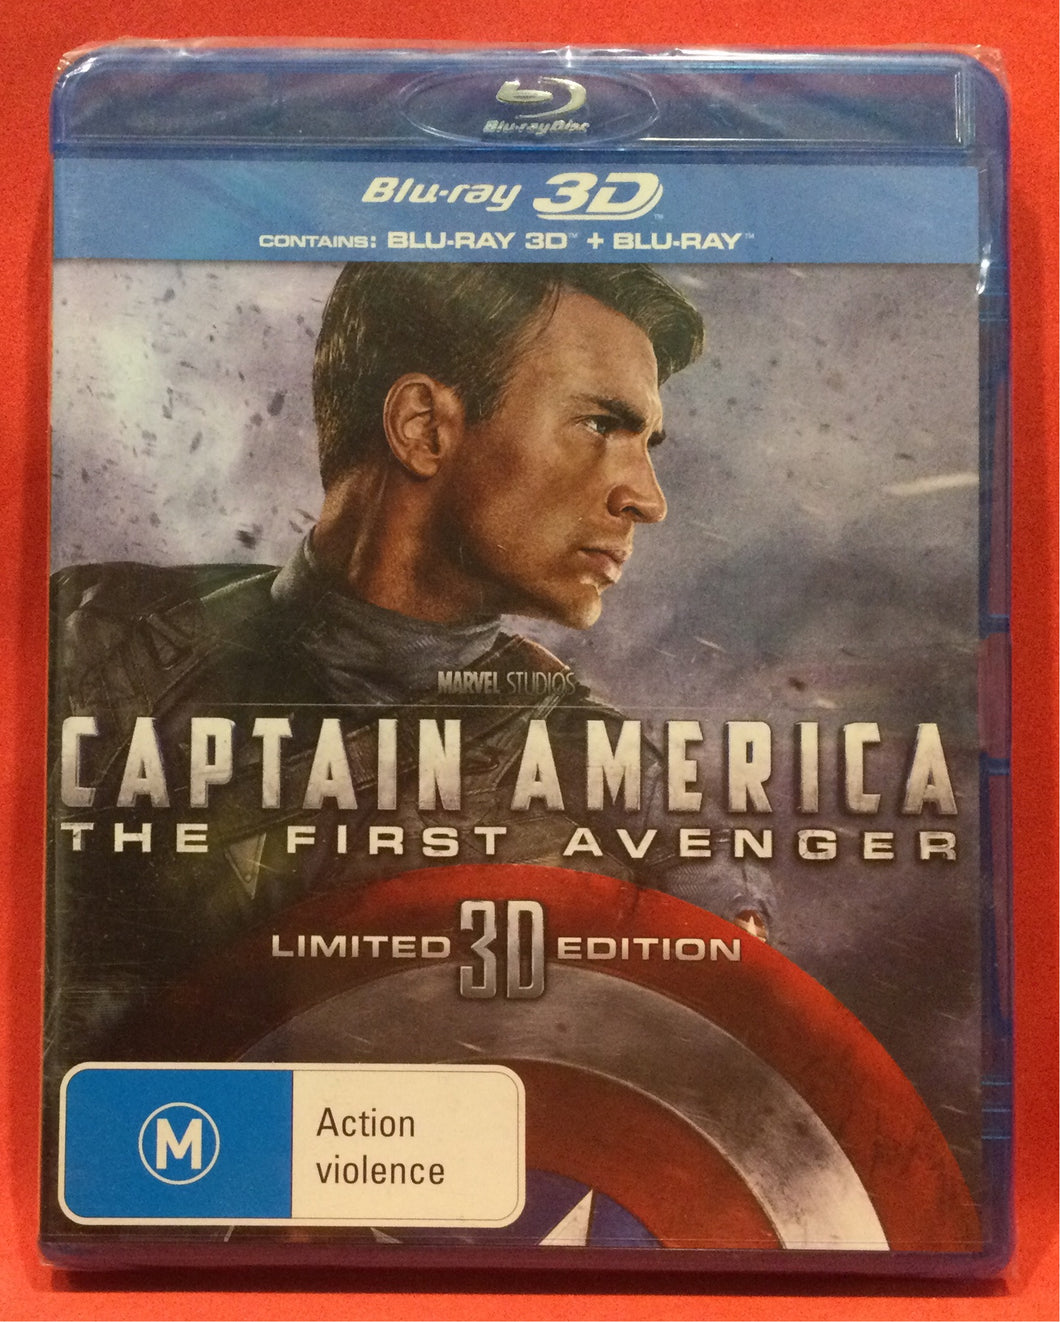 CAPTAIN AMERICA - THE FIRST AVENGER - LIMITED 3D EDITION - BLU-RAY DVD (SEALED)